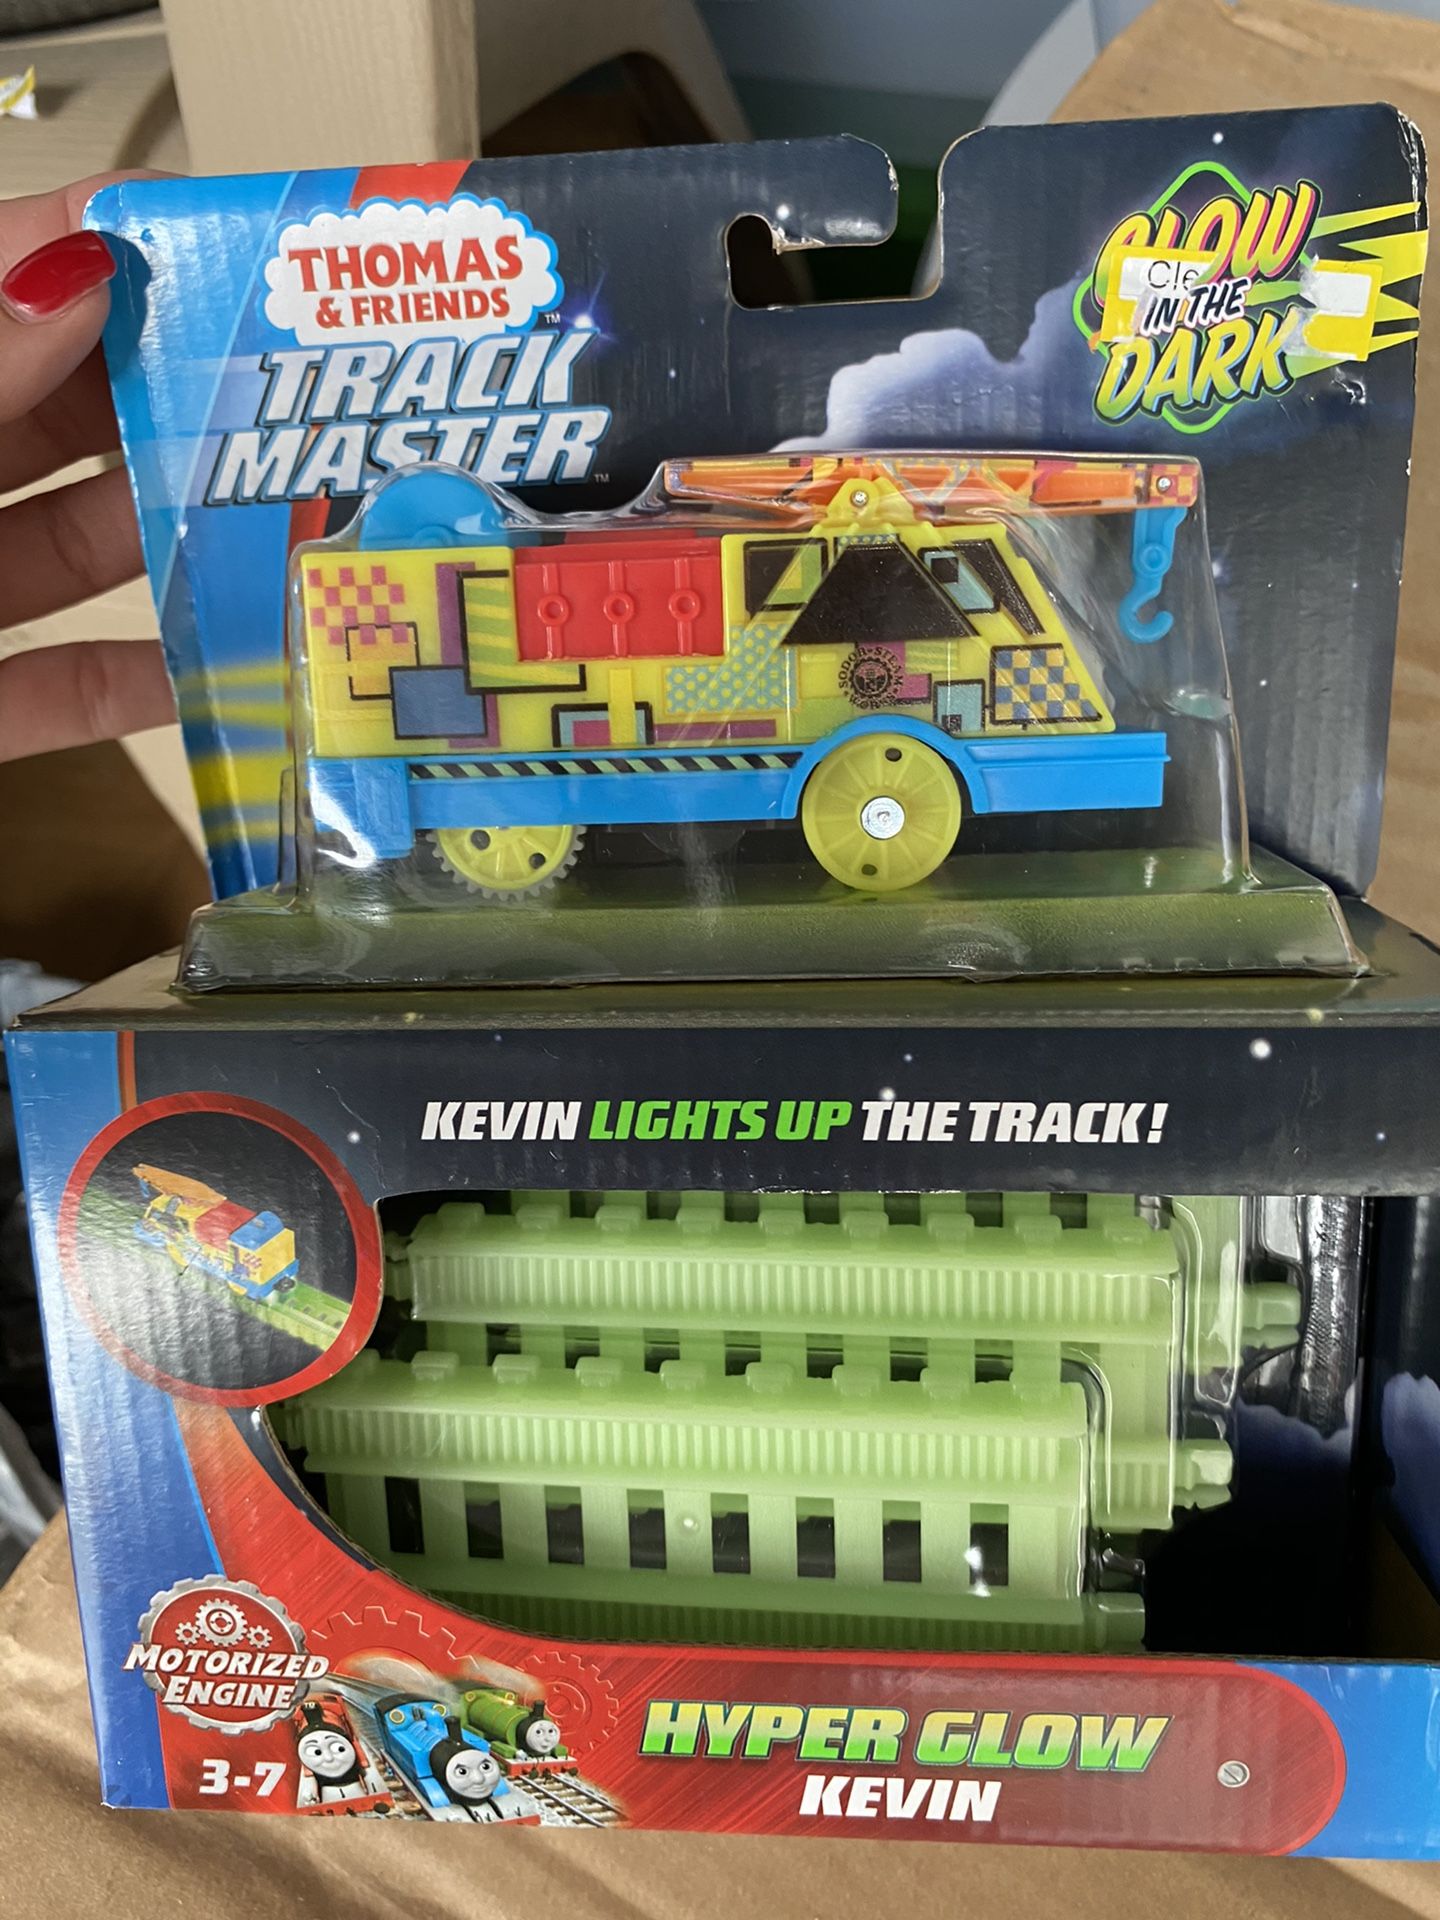 Thomas and friends HYPER GLOW KEVIN